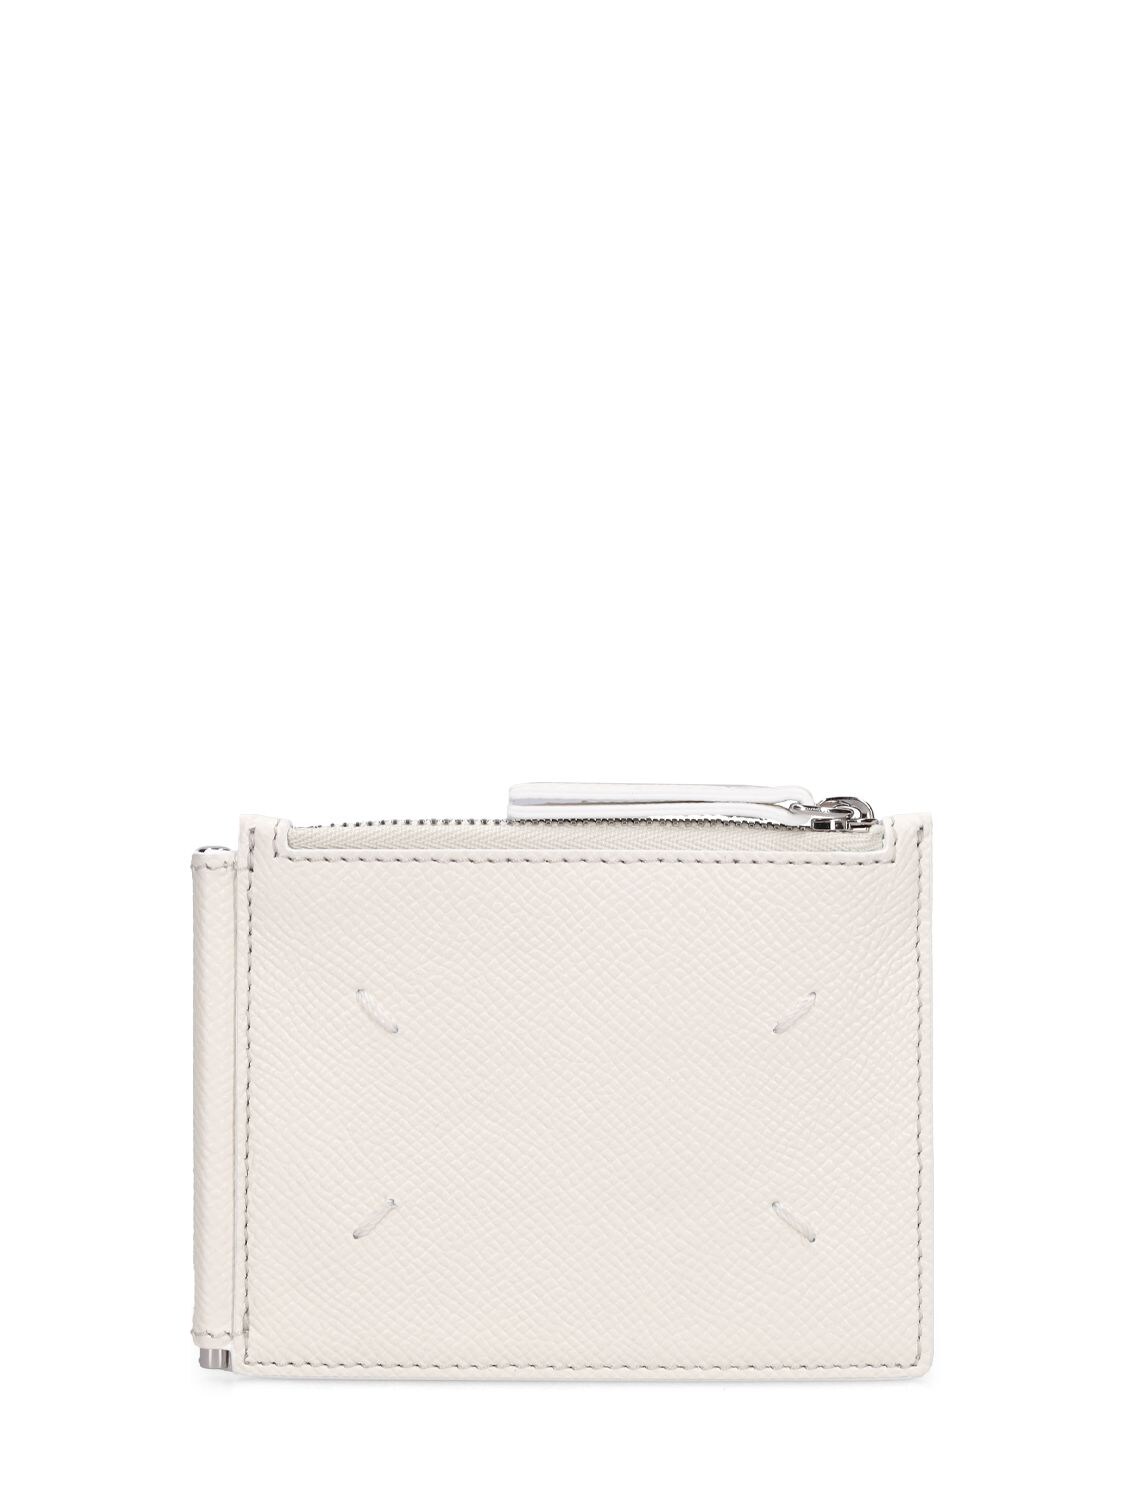 Shop Maison Margiela Grained Leather Wallet In White